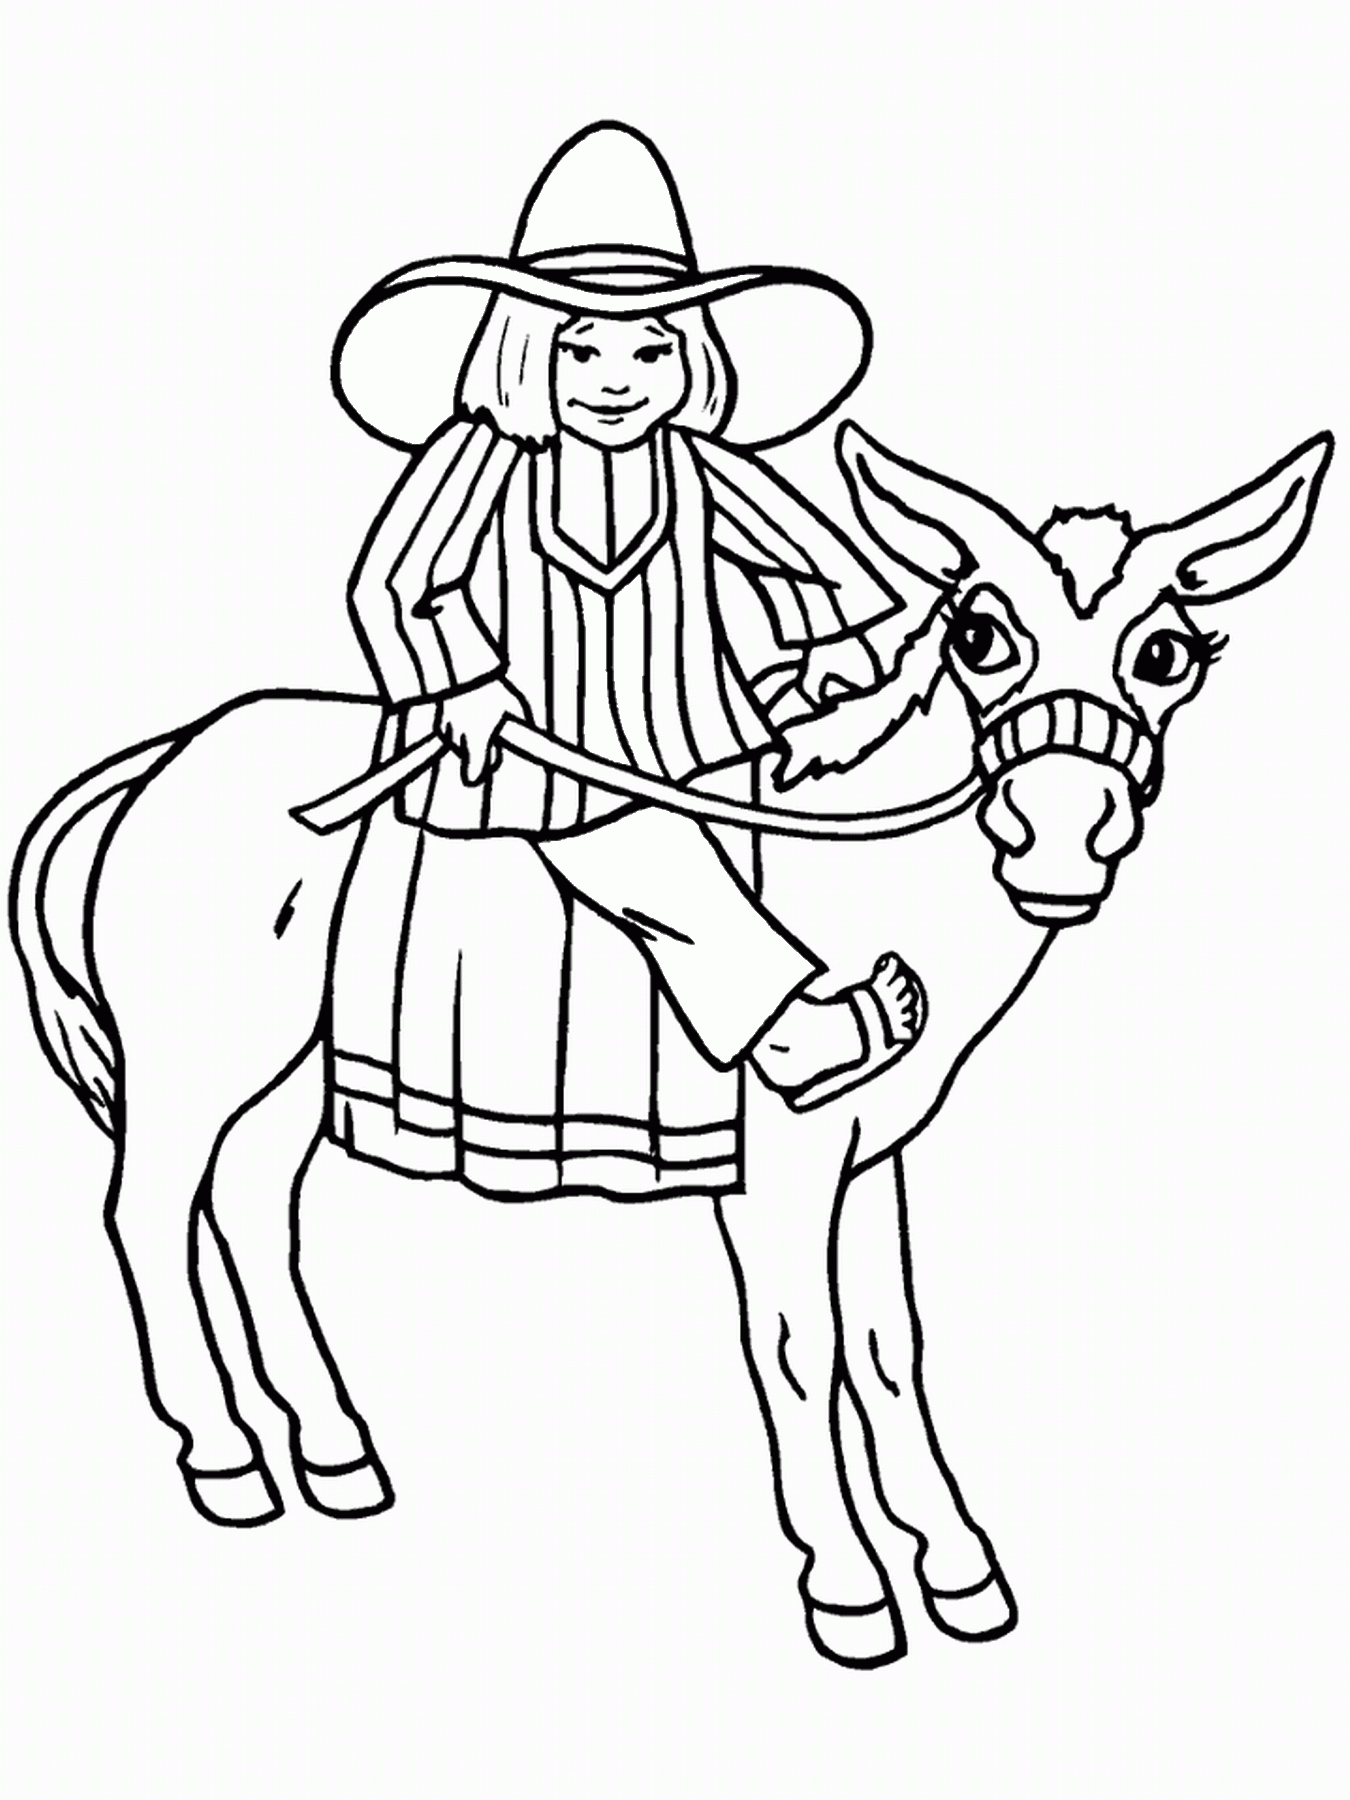 Cowboy Coloring Pages for boys cowboy_28 Printable 2020 0190 Coloring4free